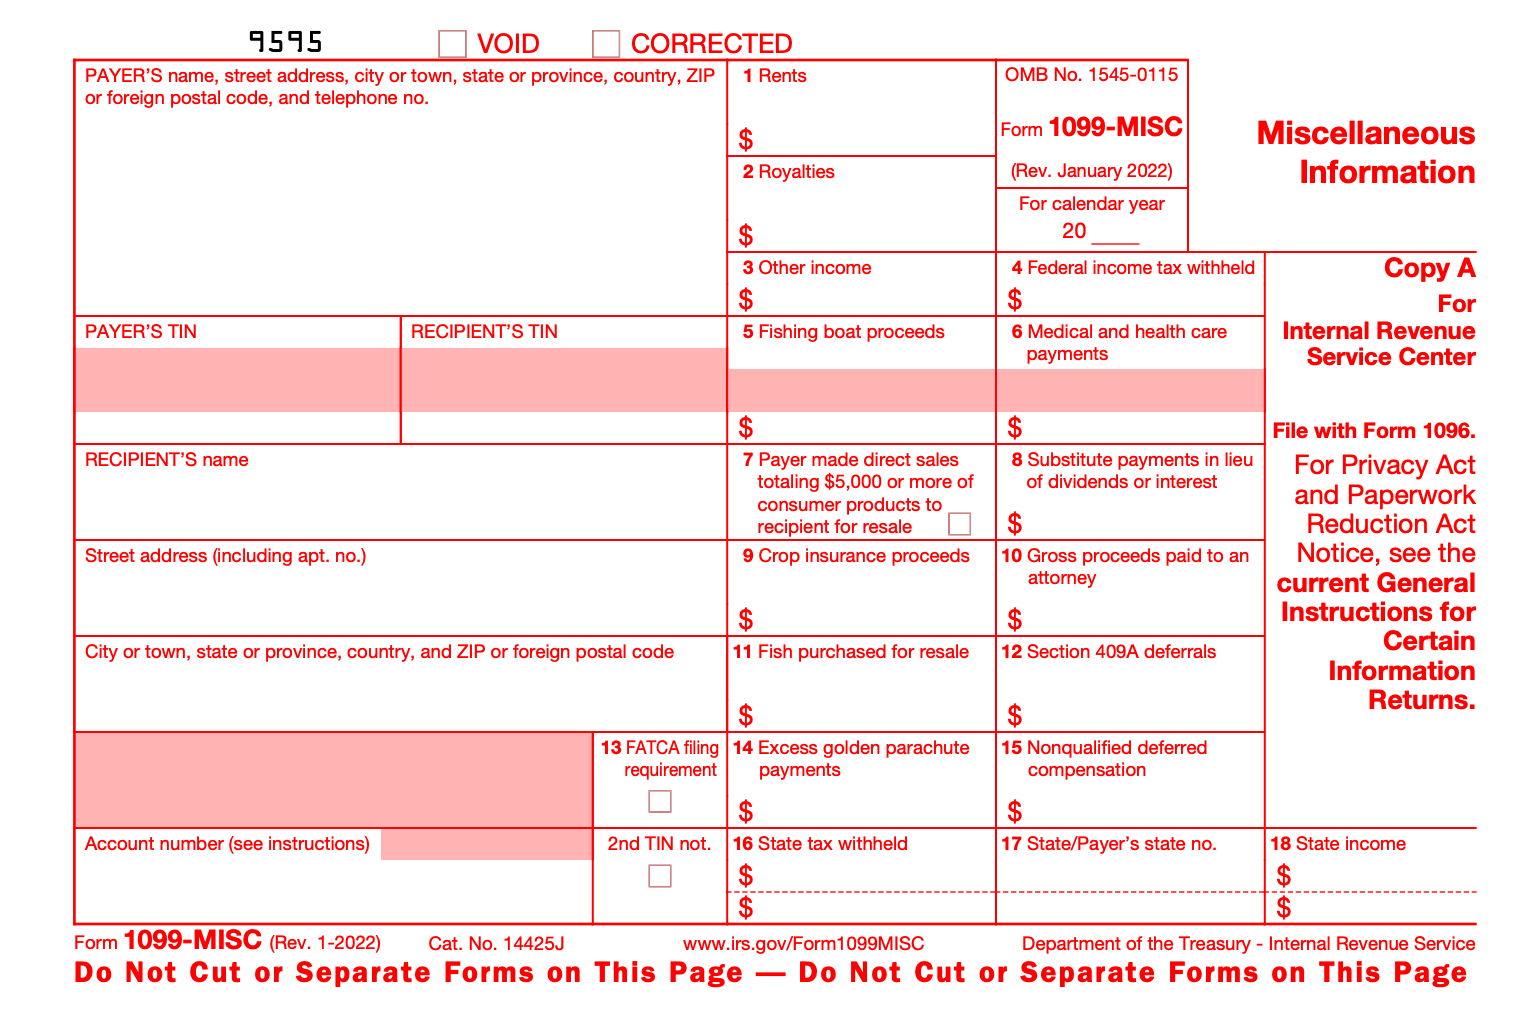 Image displays a tax form with various boxes for reporting income and taxes. Relevant for self-employed, freelancers, and those receiving 1099 forms.